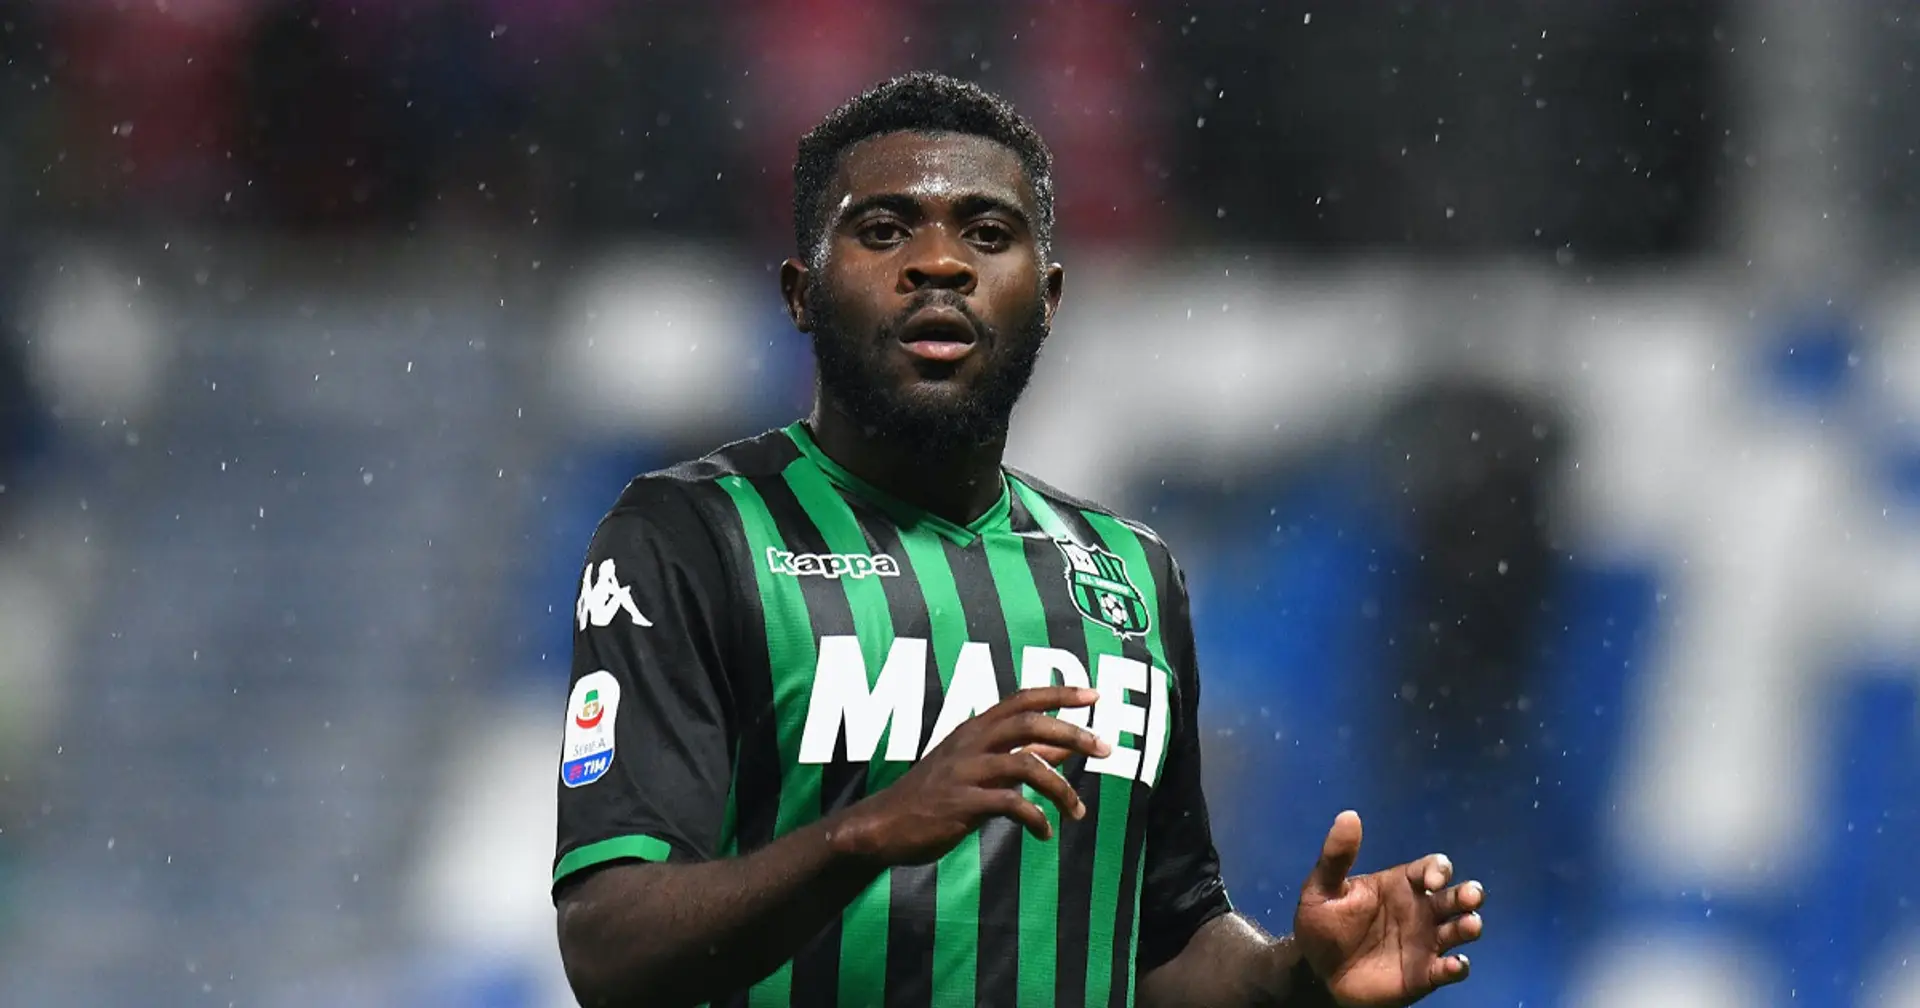 'No one told me anything': Jeremie Boga claims he had no contacts with Chelsea, looks poised for Sassuolo stay